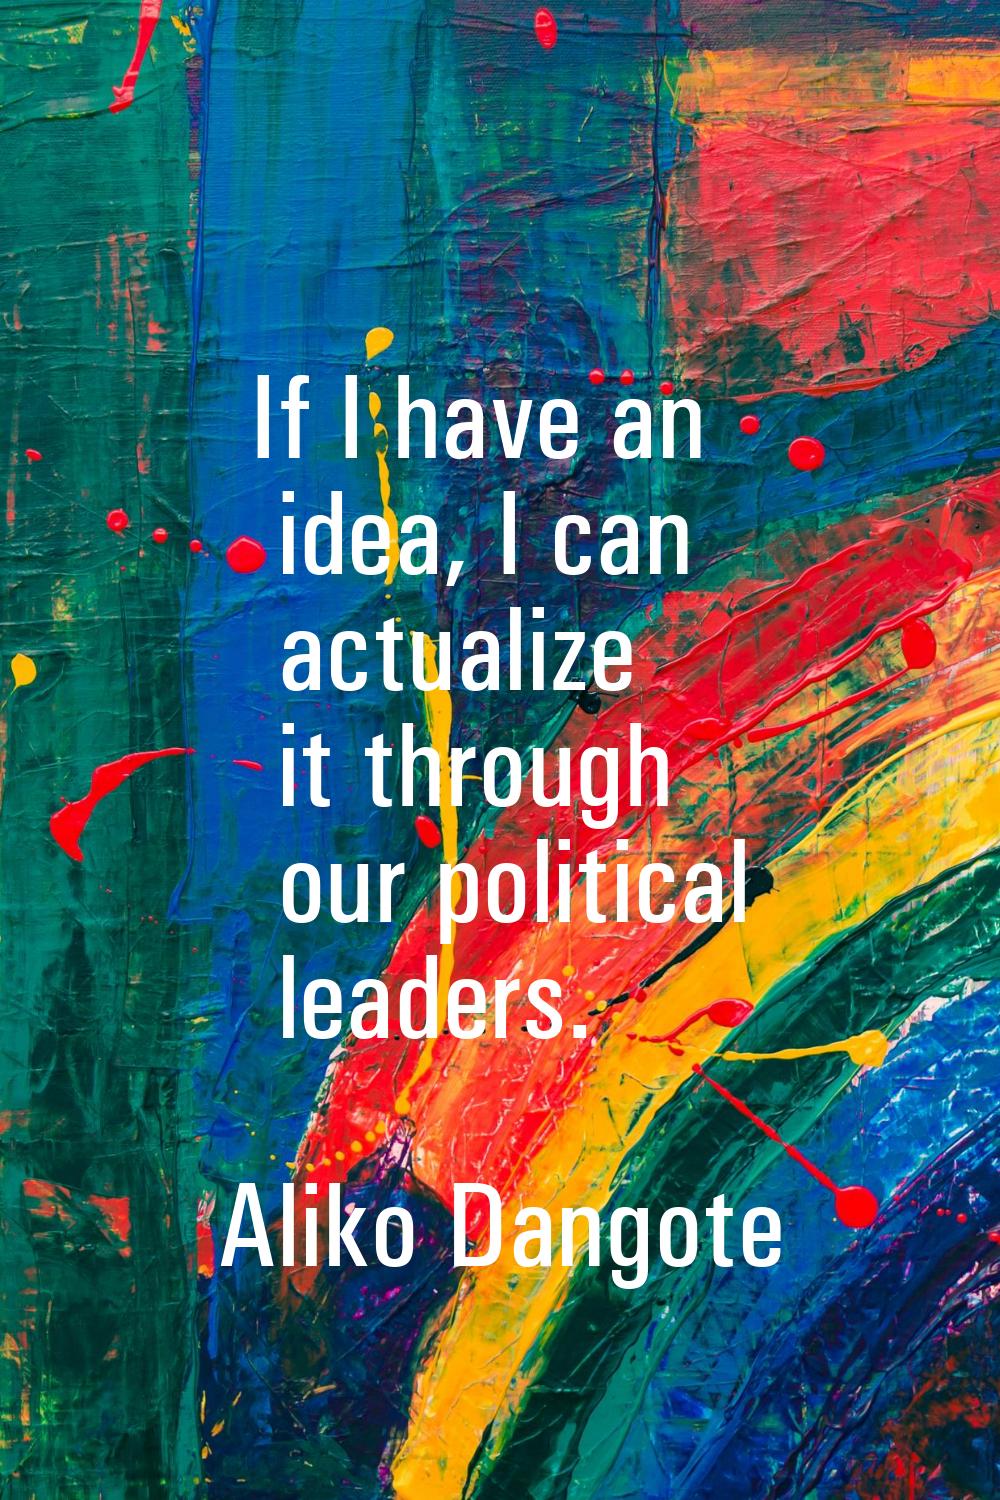 If I have an idea, I can actualize it through our political leaders.